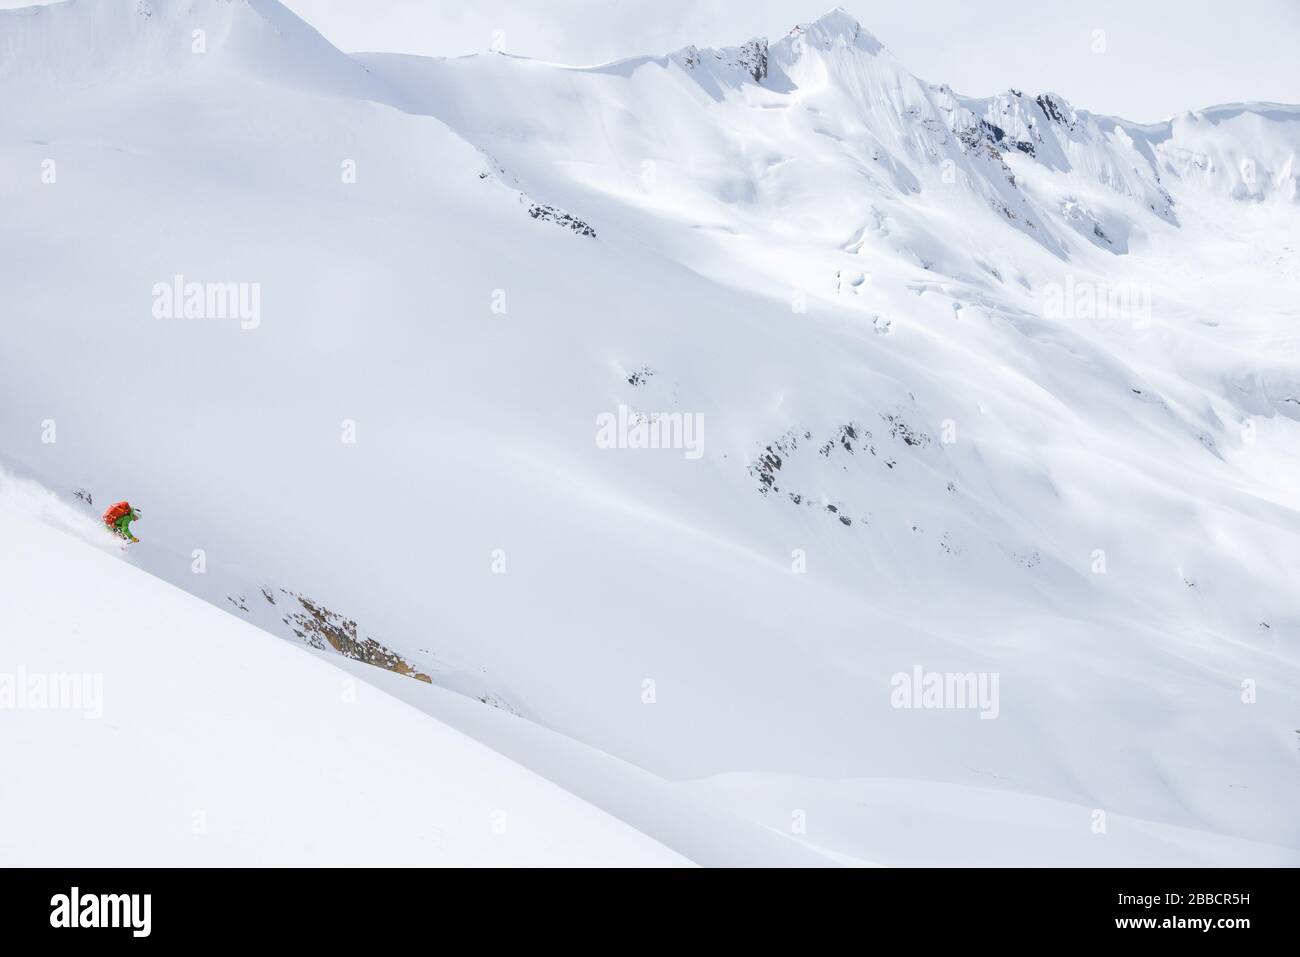 A skier on a powdery descent on the Farnham Glacier in the Jumbo Valley, British Columbia Stock Photo